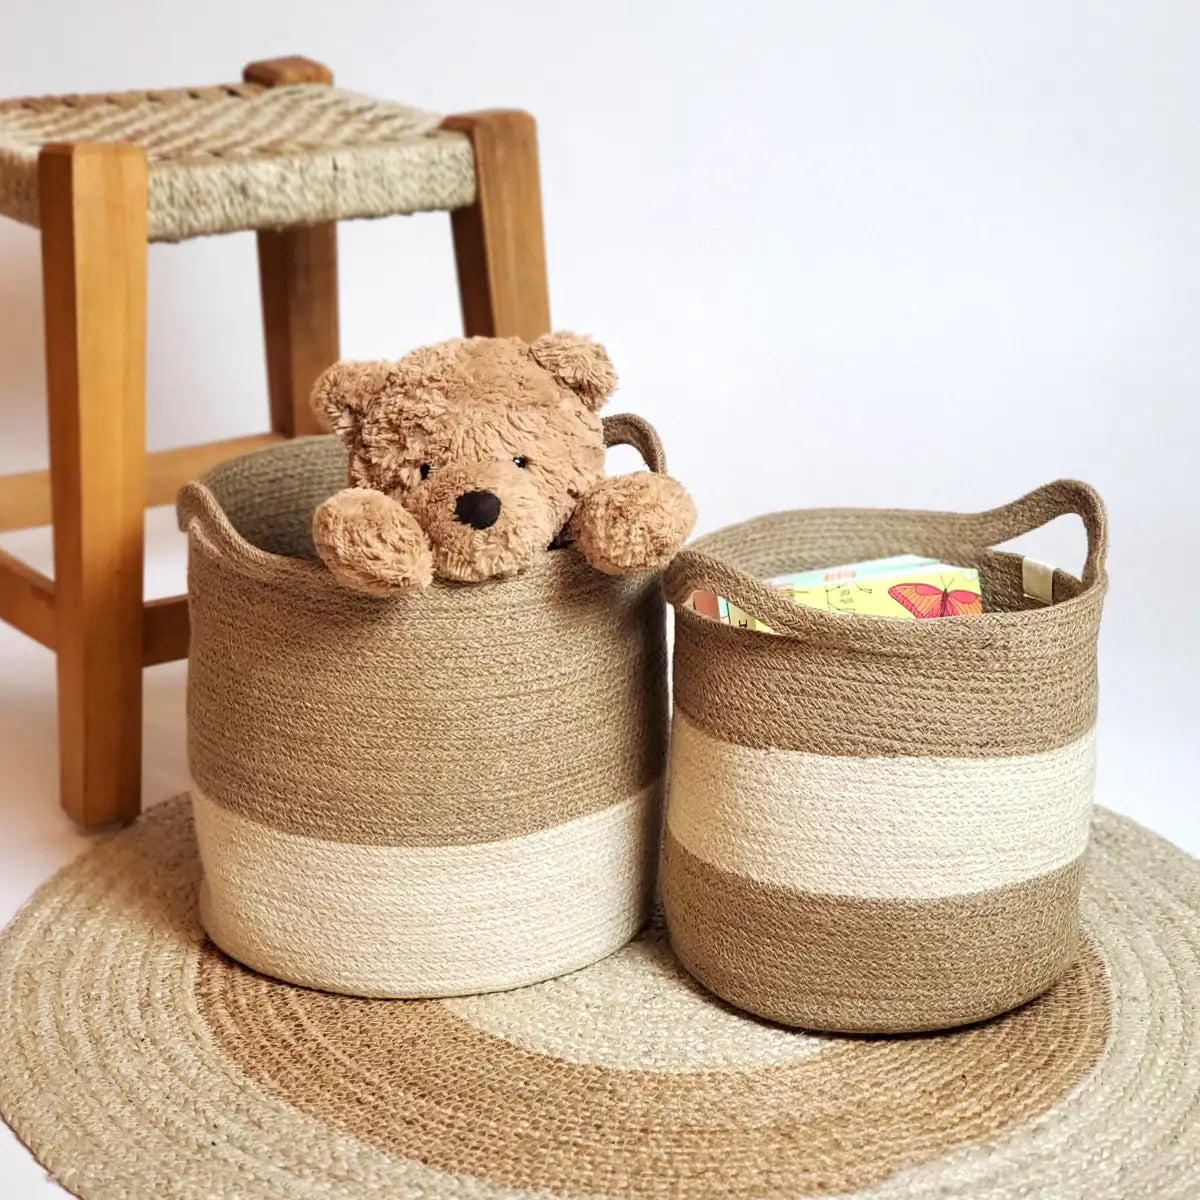 boo and rook nursery accessories, basket sets